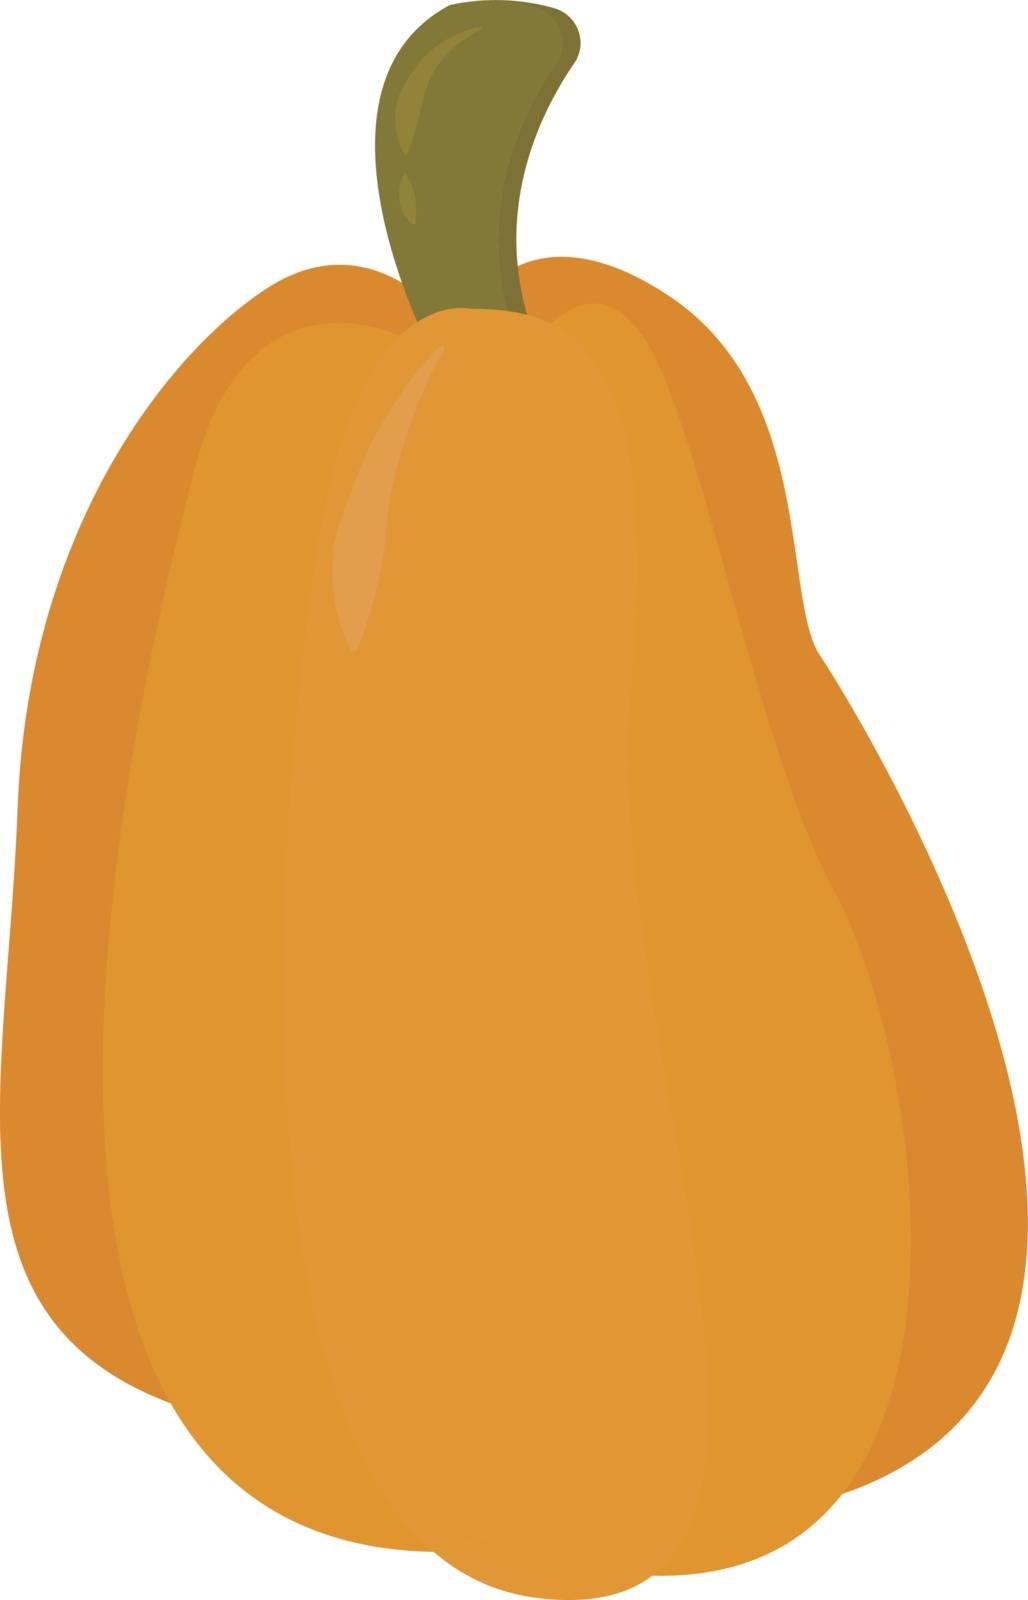 Small pumpkin, illustration, vector on white background. by Morphart